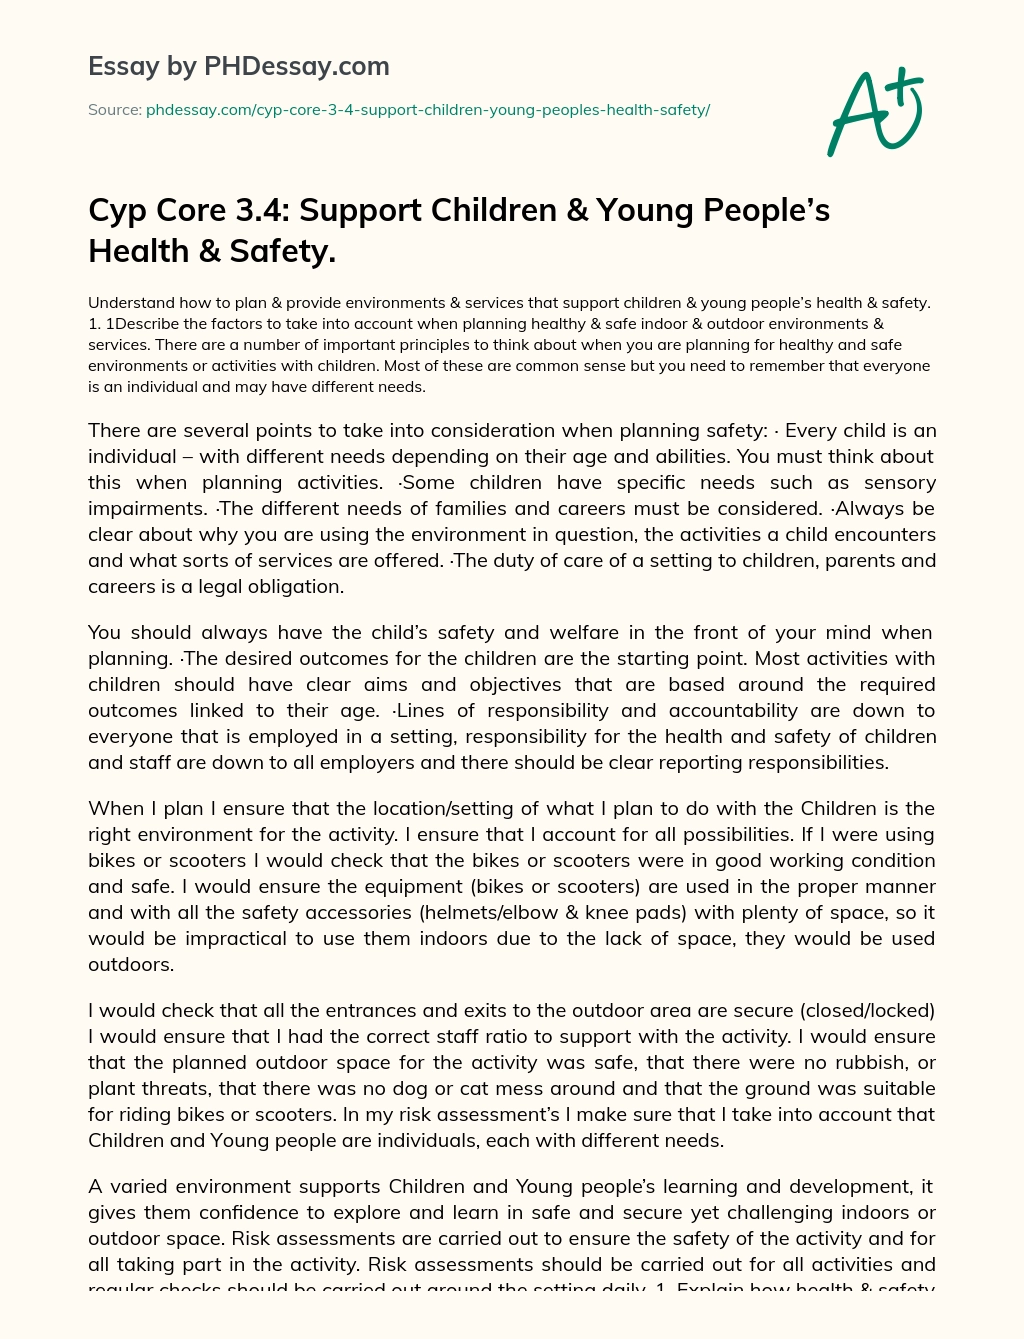 Cyp Core 3.4:	 Support Children & Young People’s Health & Safety. essay